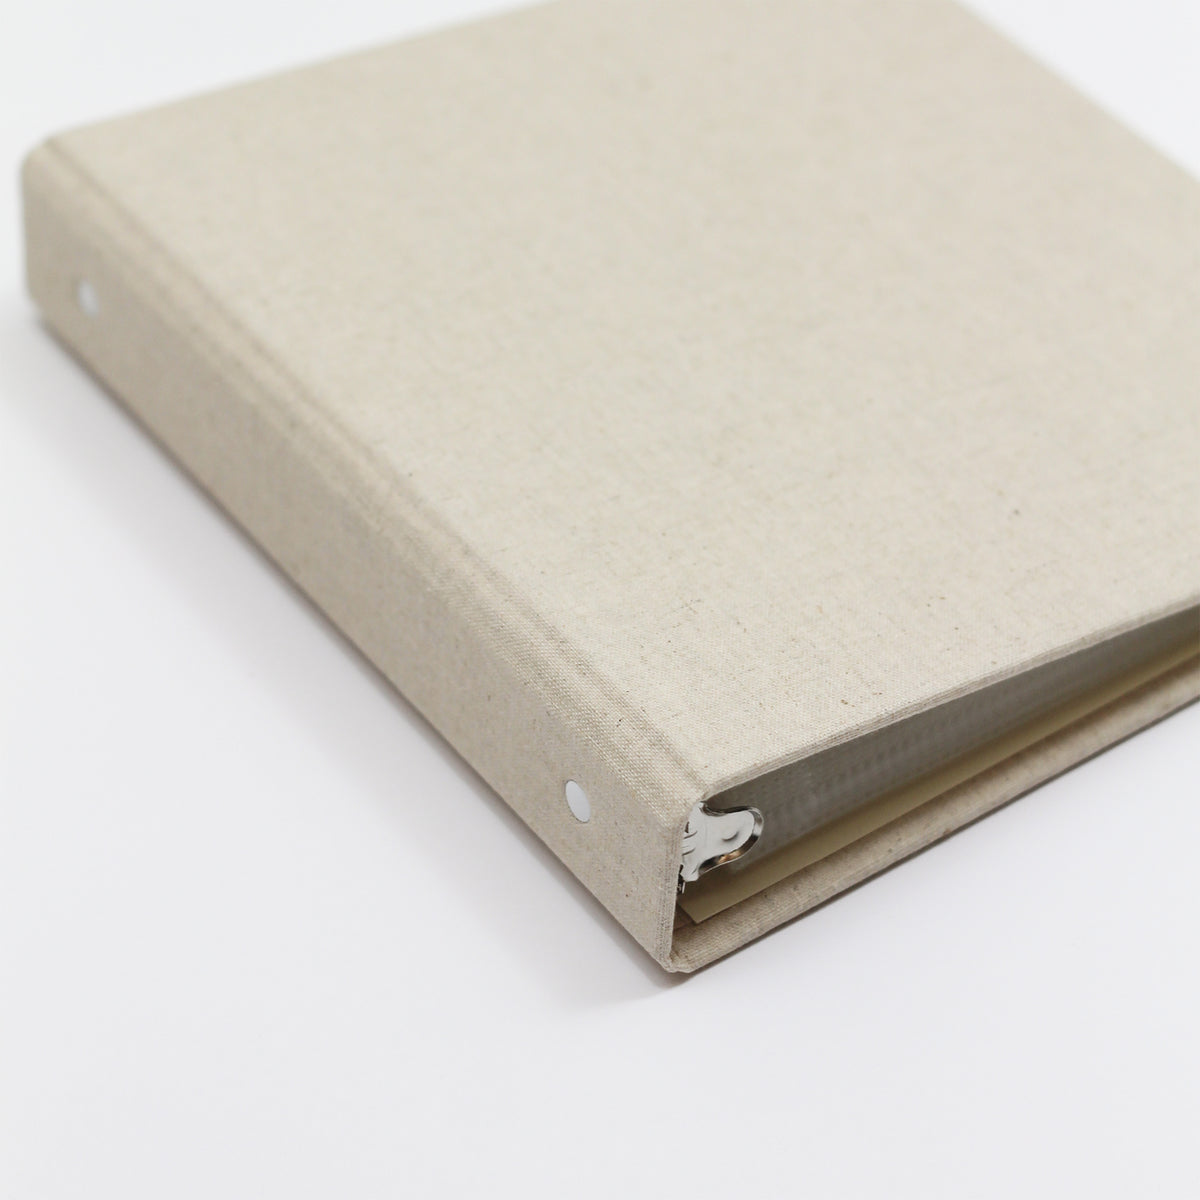 Medium Photo Binder For 4x6 Photos | Cover: Natural Linen | Available Personalized